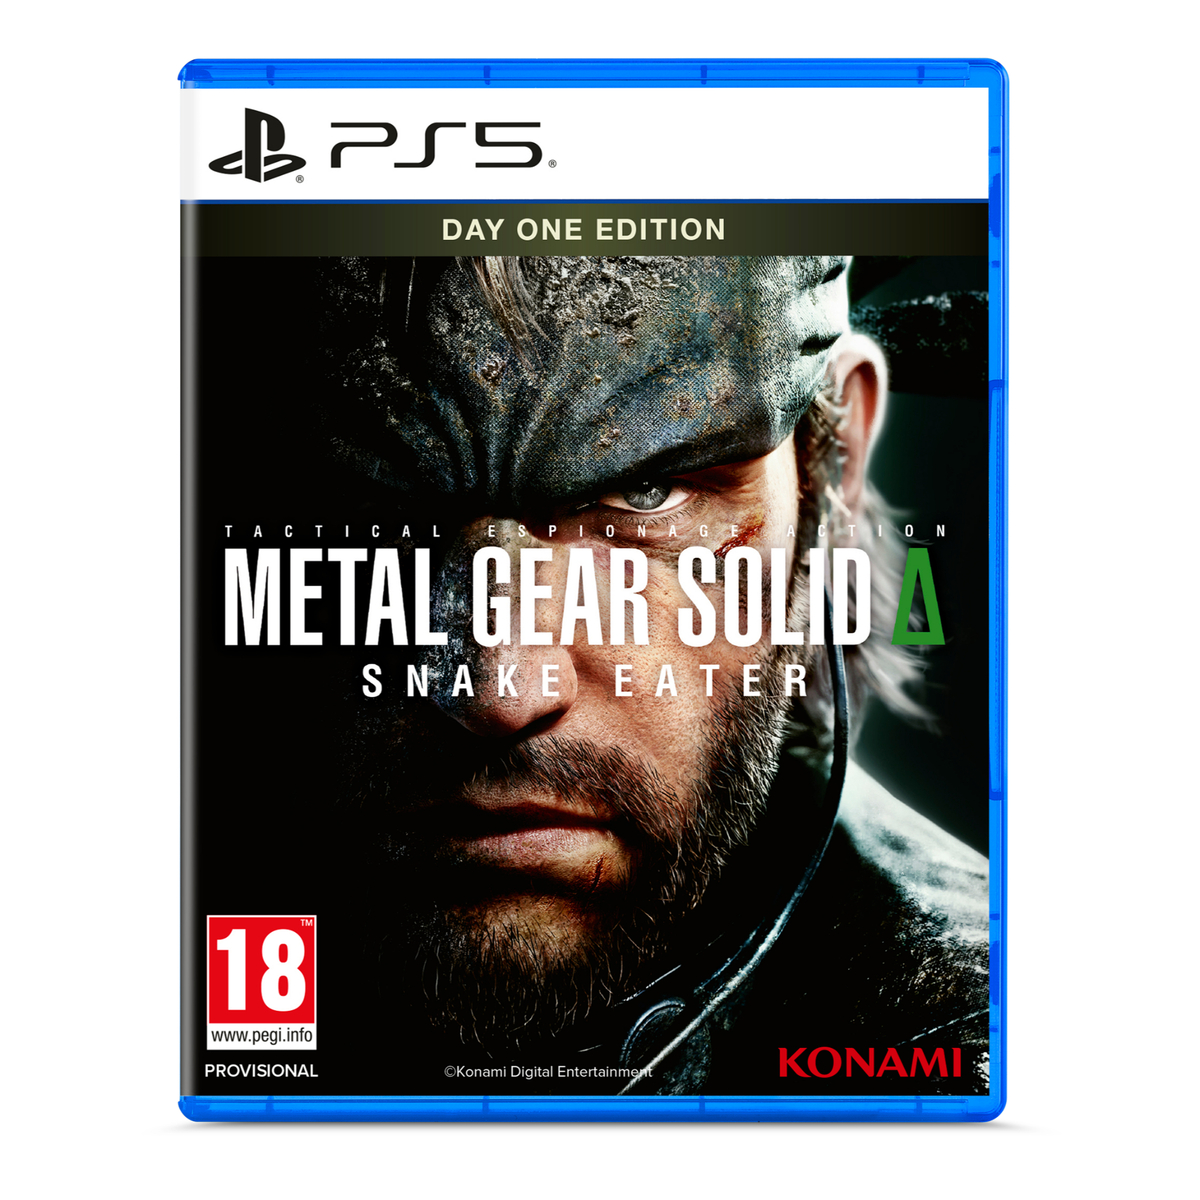 PRE-ORDER Metal Gear Solid Δ: Snake Eater for PS5